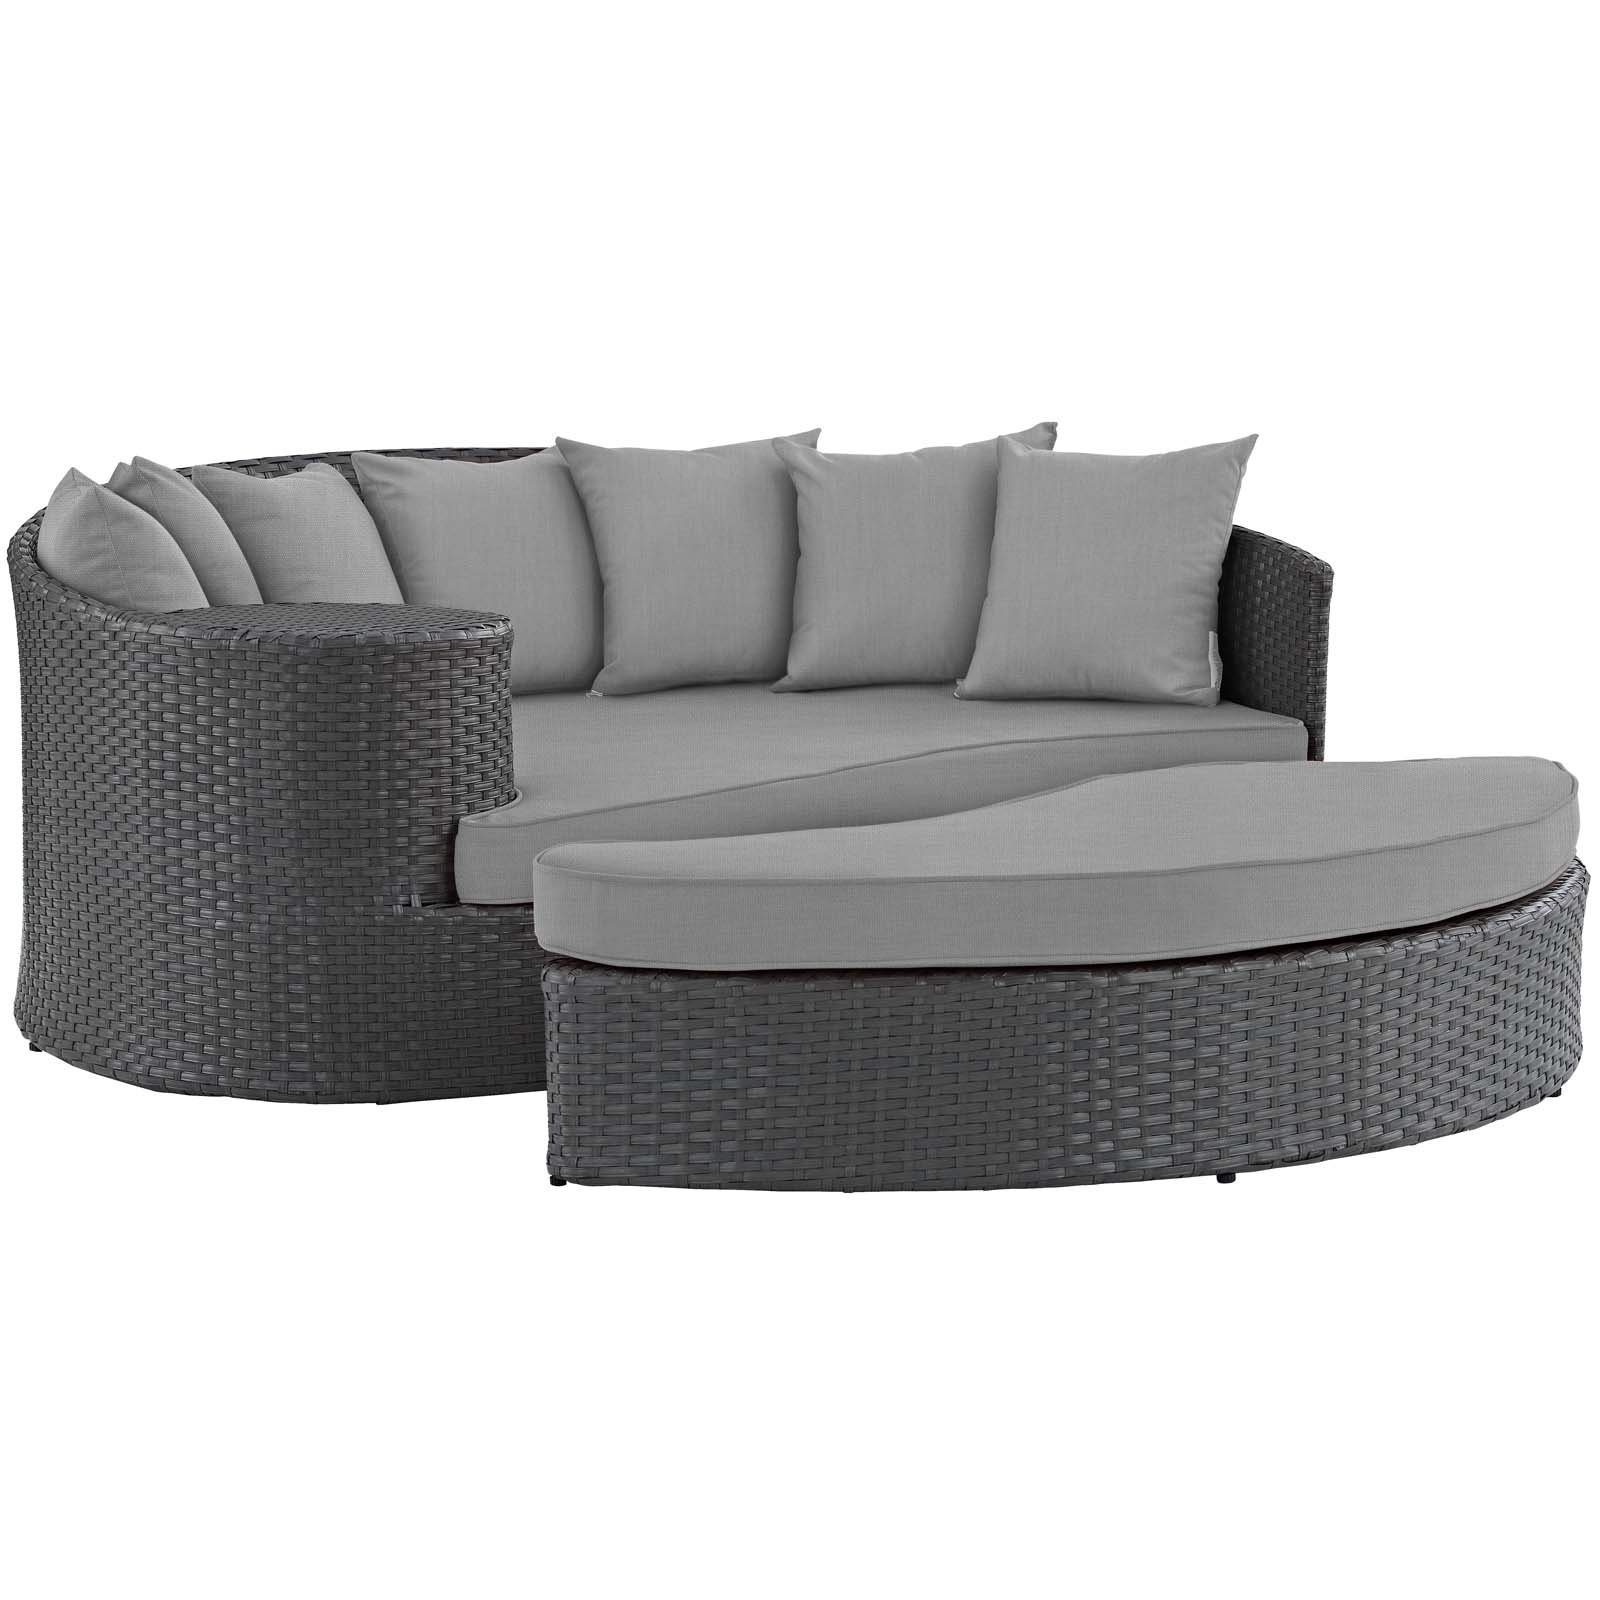 Modern Patio Furniture Sectional Set Garden Sofa Bed Daybed With Cushions